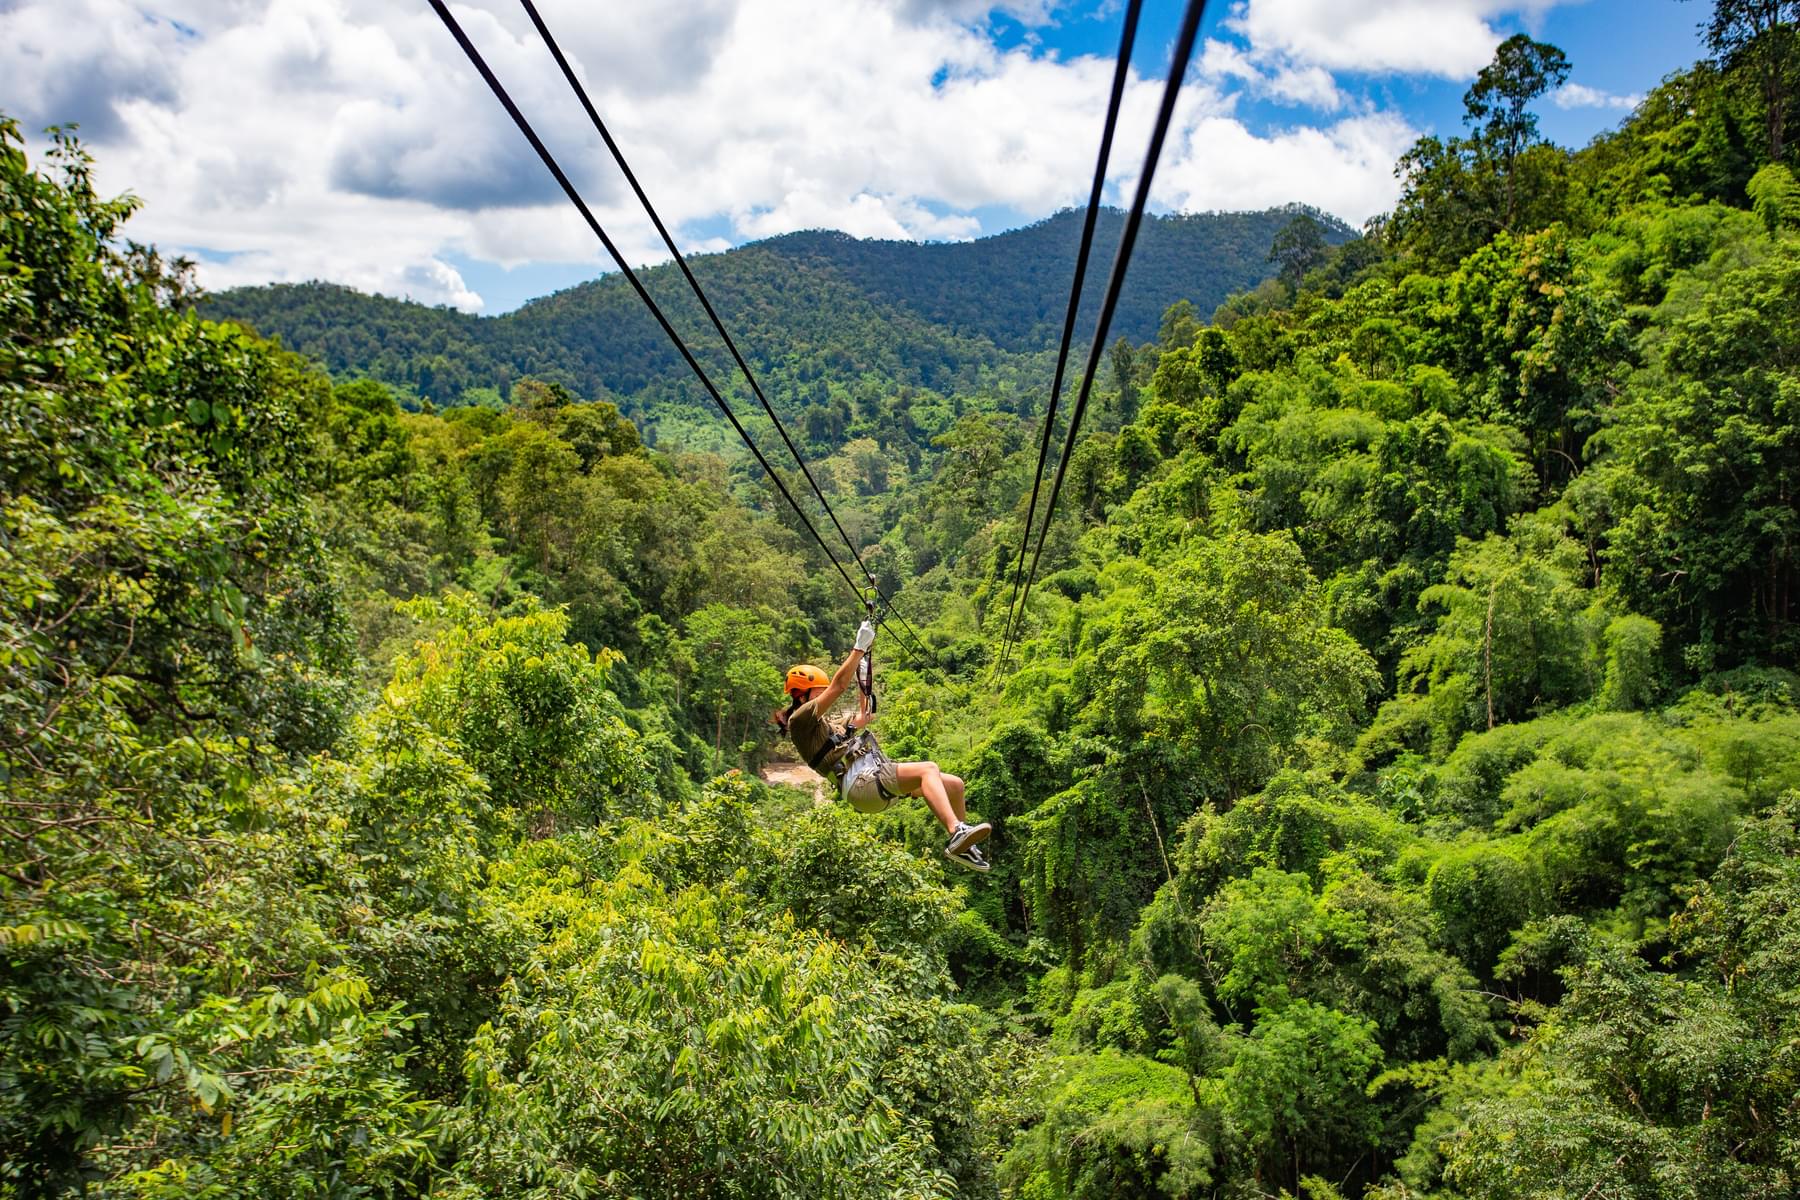 Safety Tips for The Ziplining in Chiang Mai